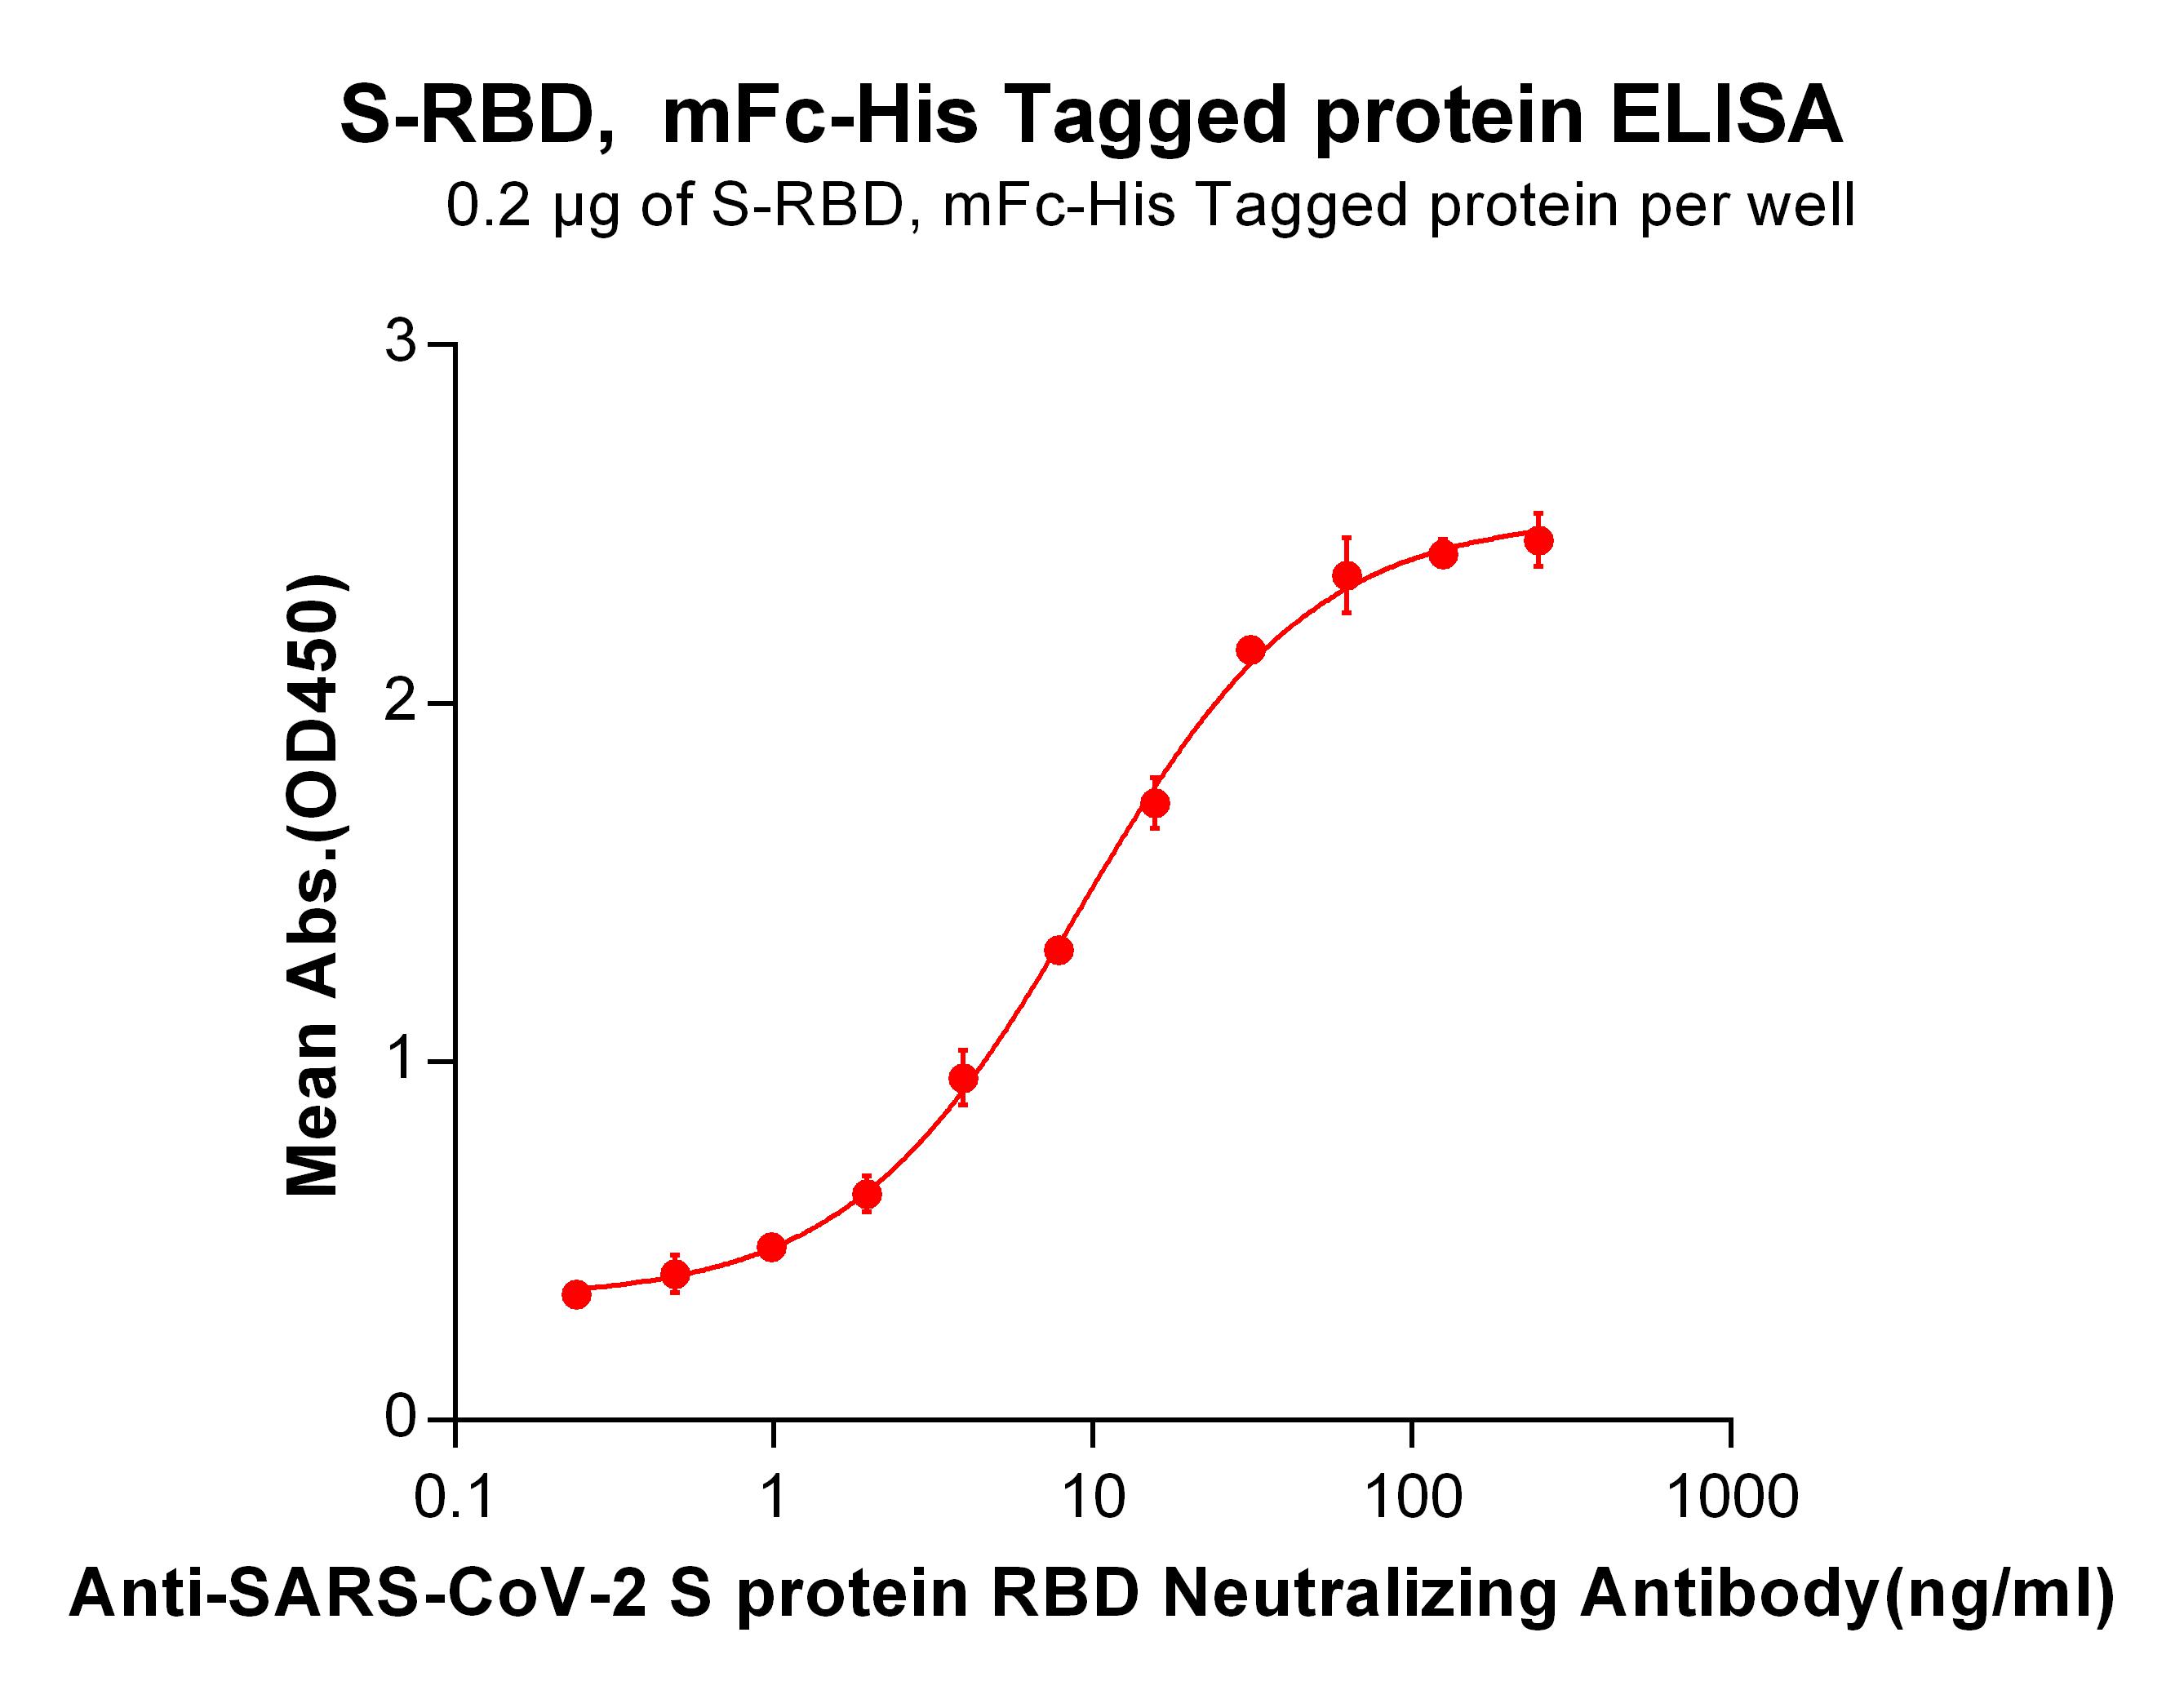 Recombinant SARS-CoV-2 (2019-nCoV) S protein RBD with C-terminal mouse Fc and 6×His tag